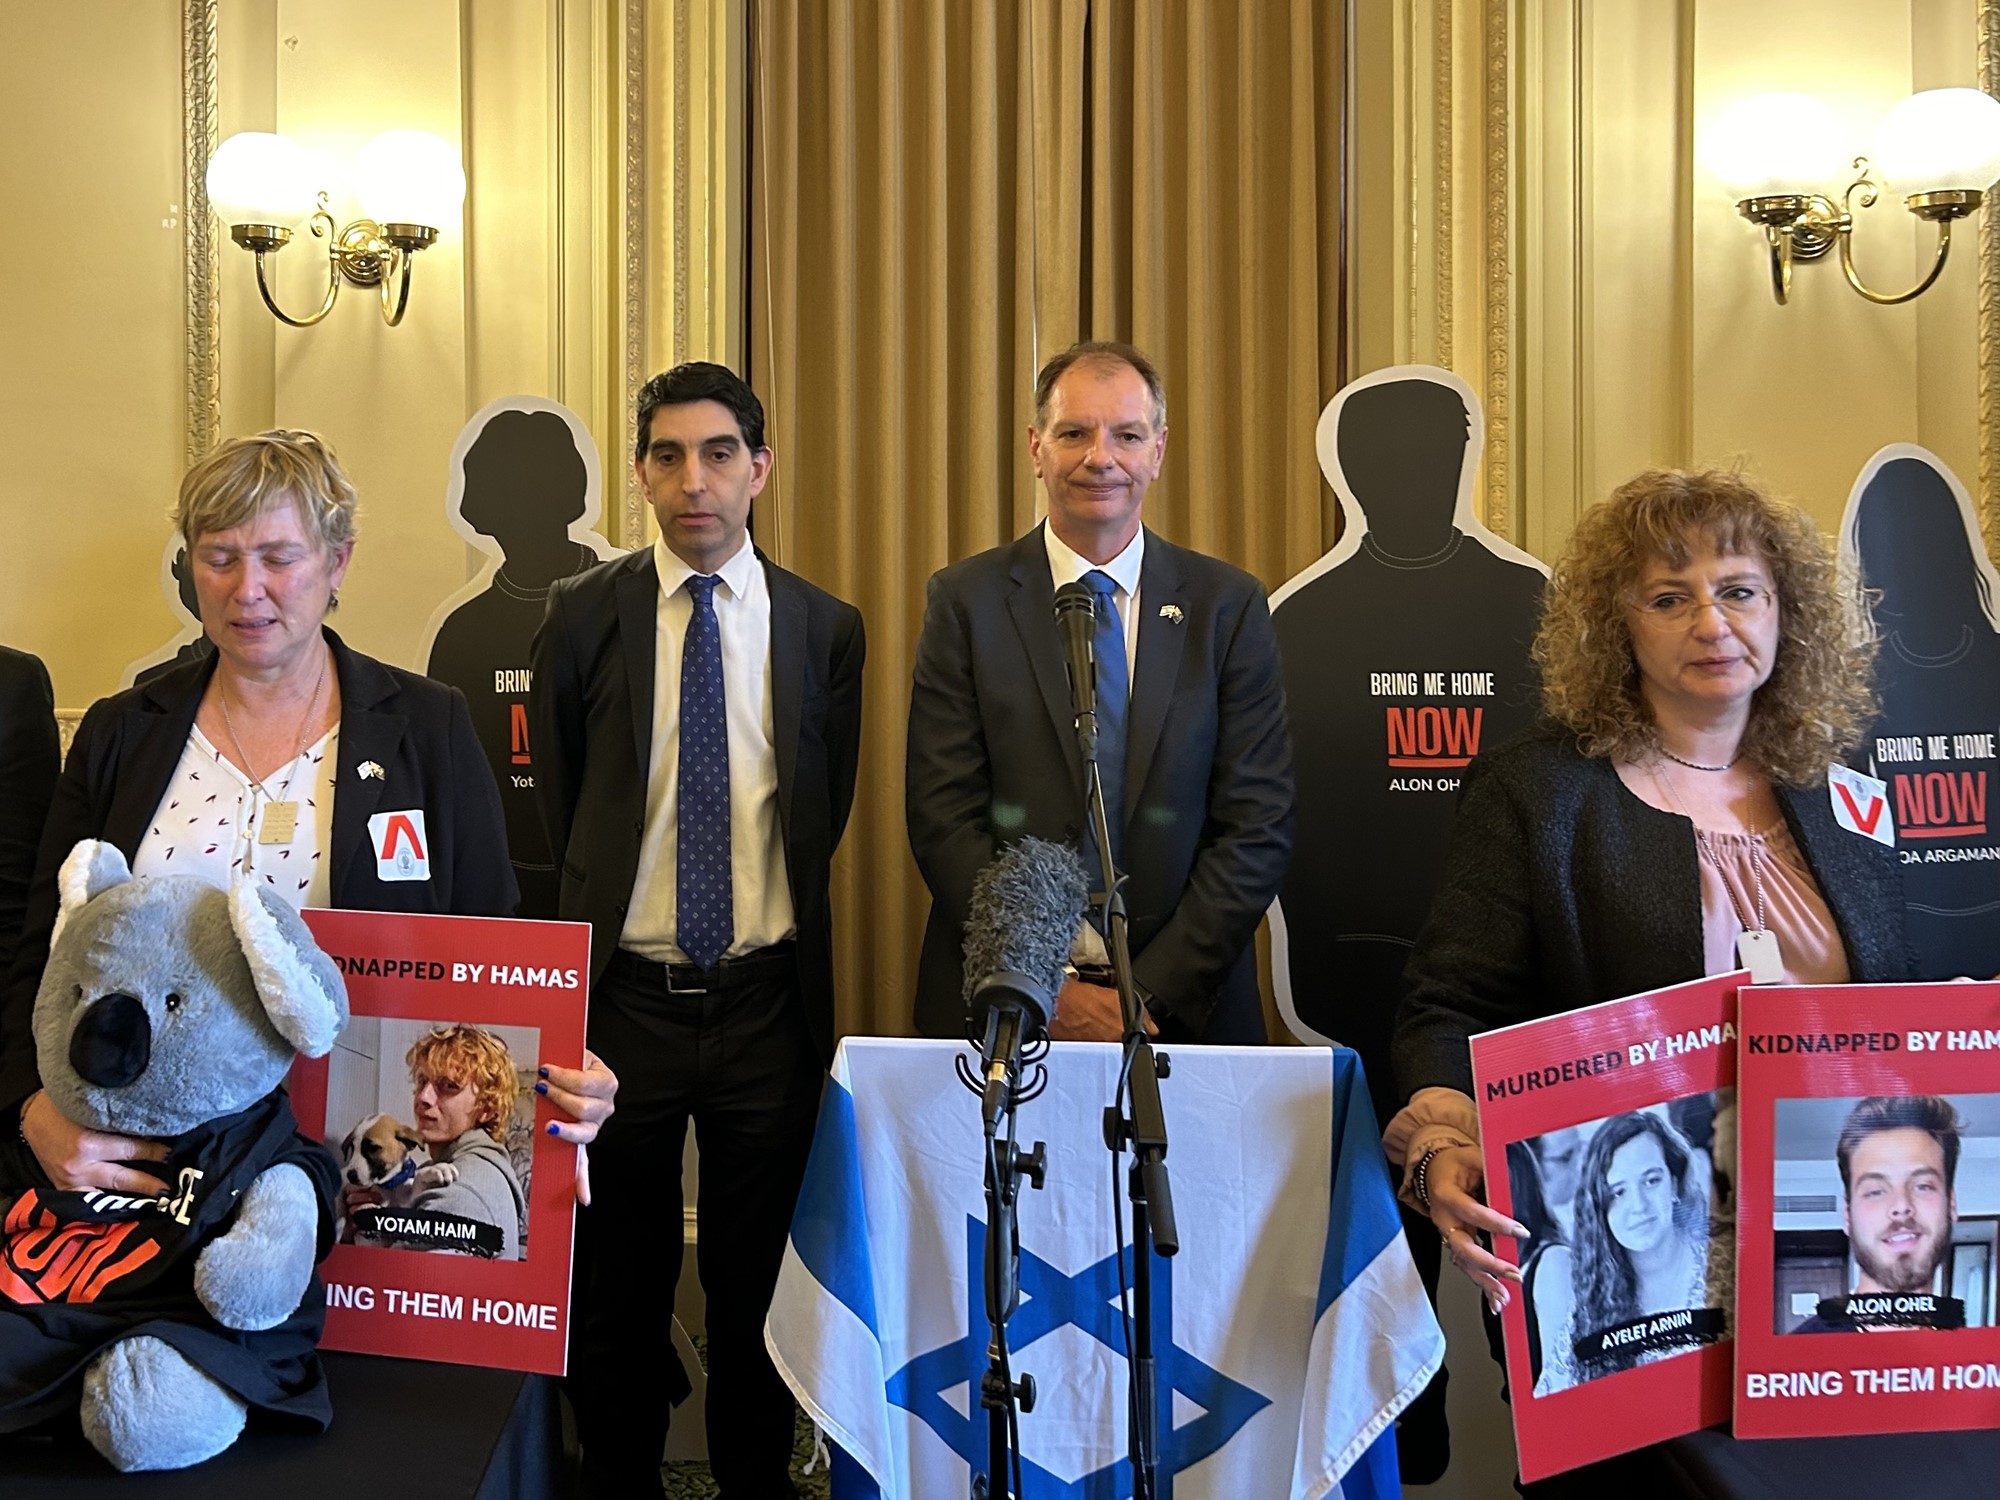 Four people wearing black and holding signs standing near a podium with israeli flags and carboard cutout silhouettes